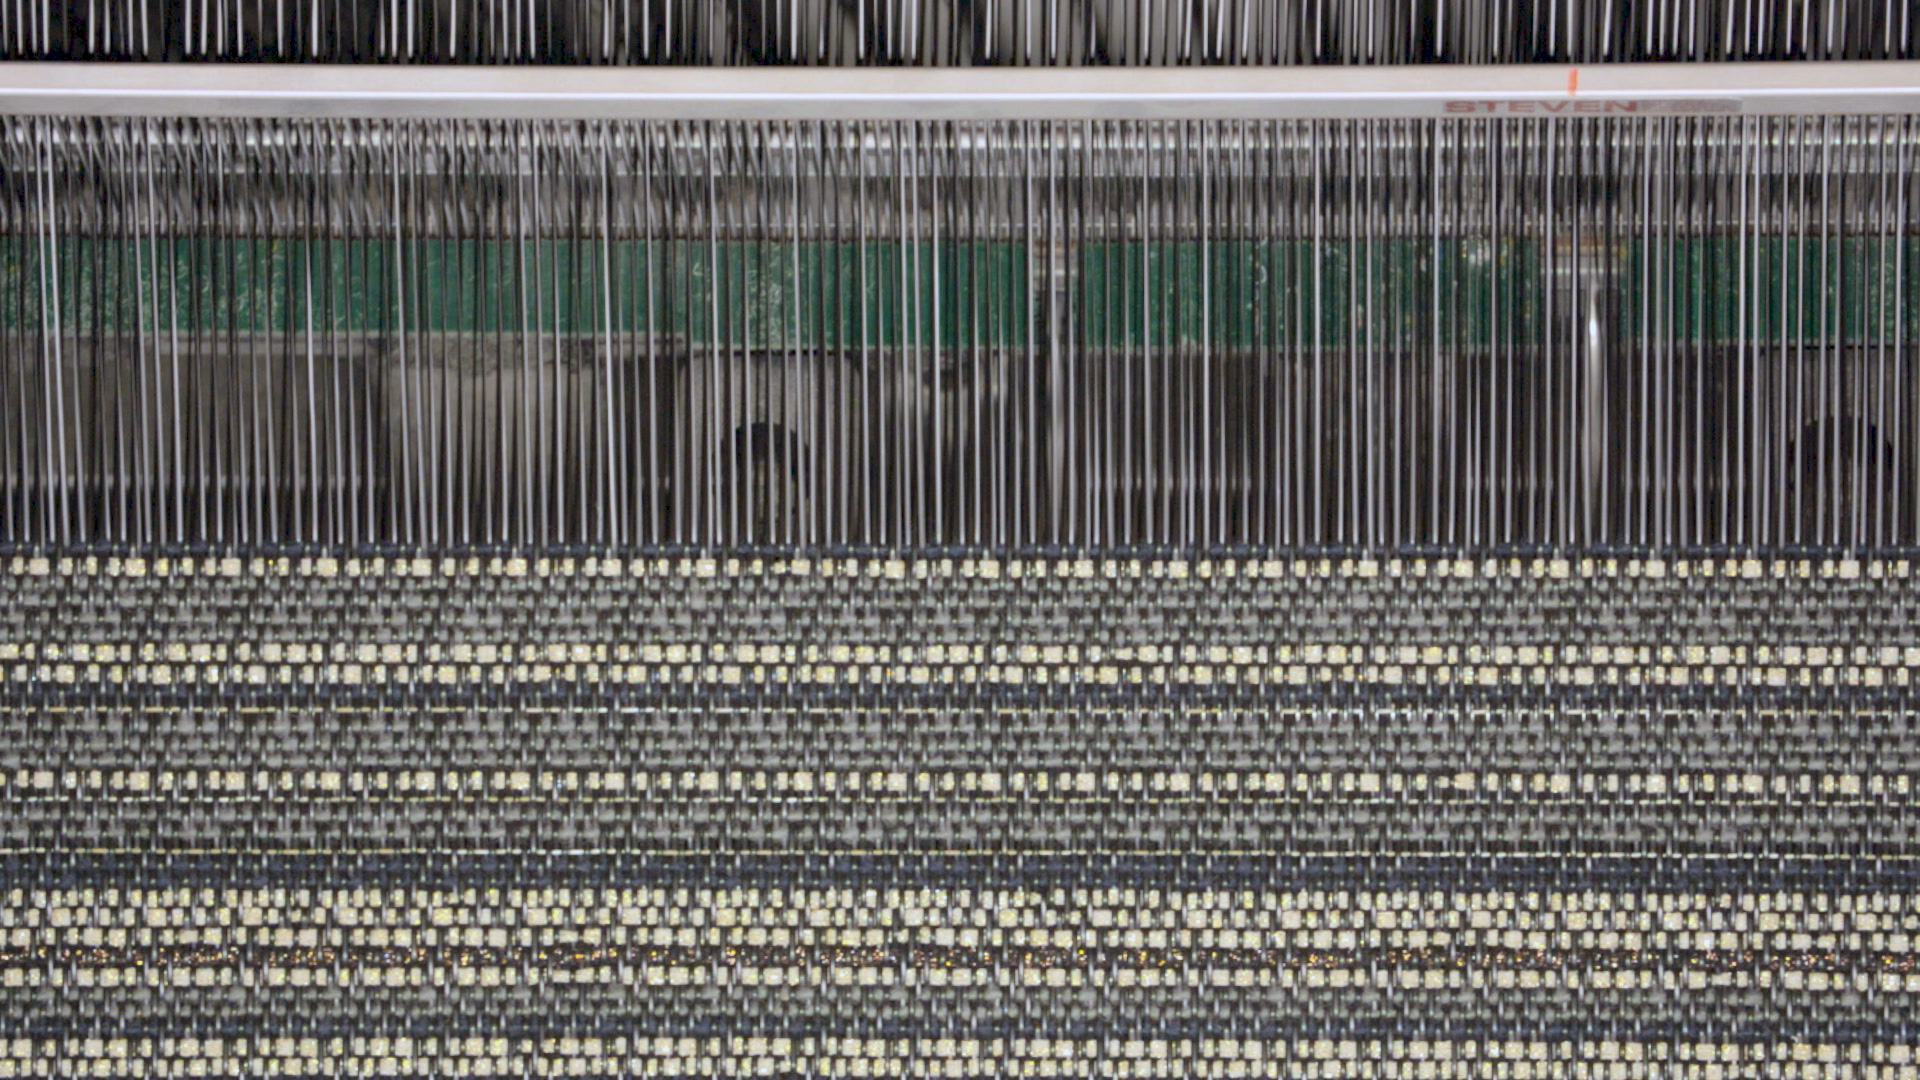 Loom weaving vinyl thread together with other textiles such as wool or cotton